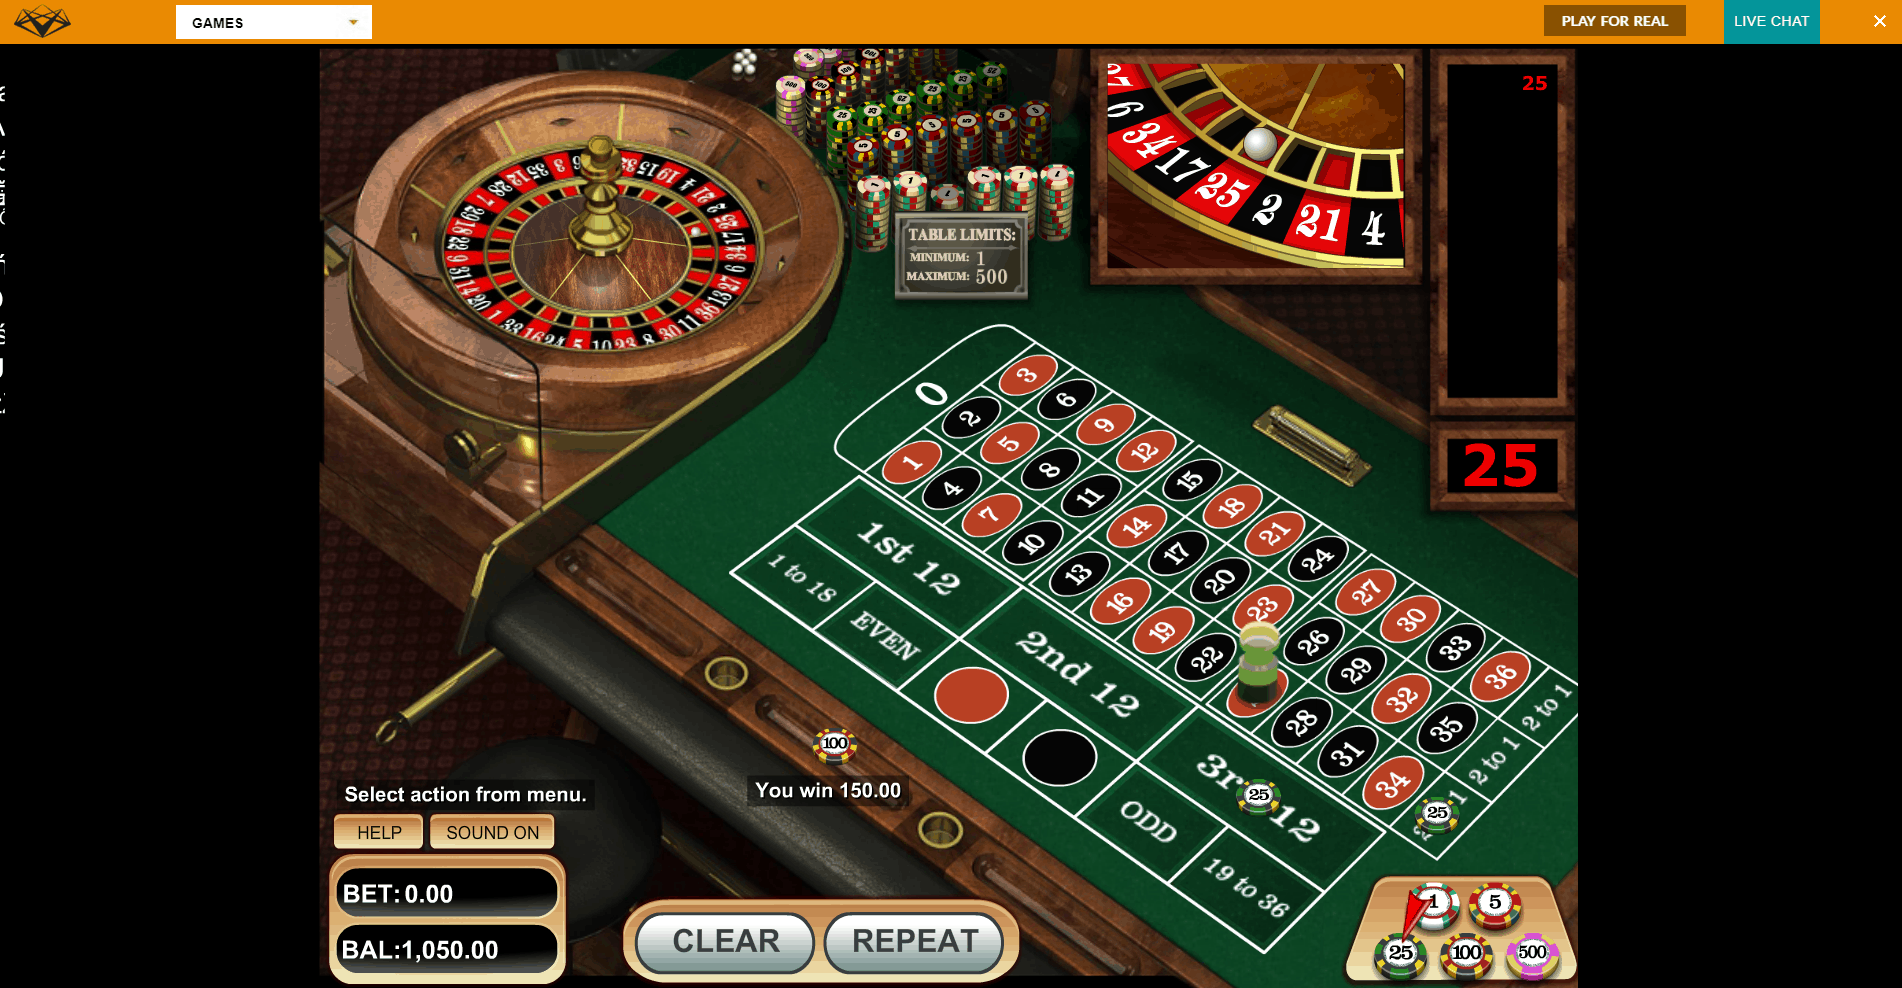 Curacao gambling commission